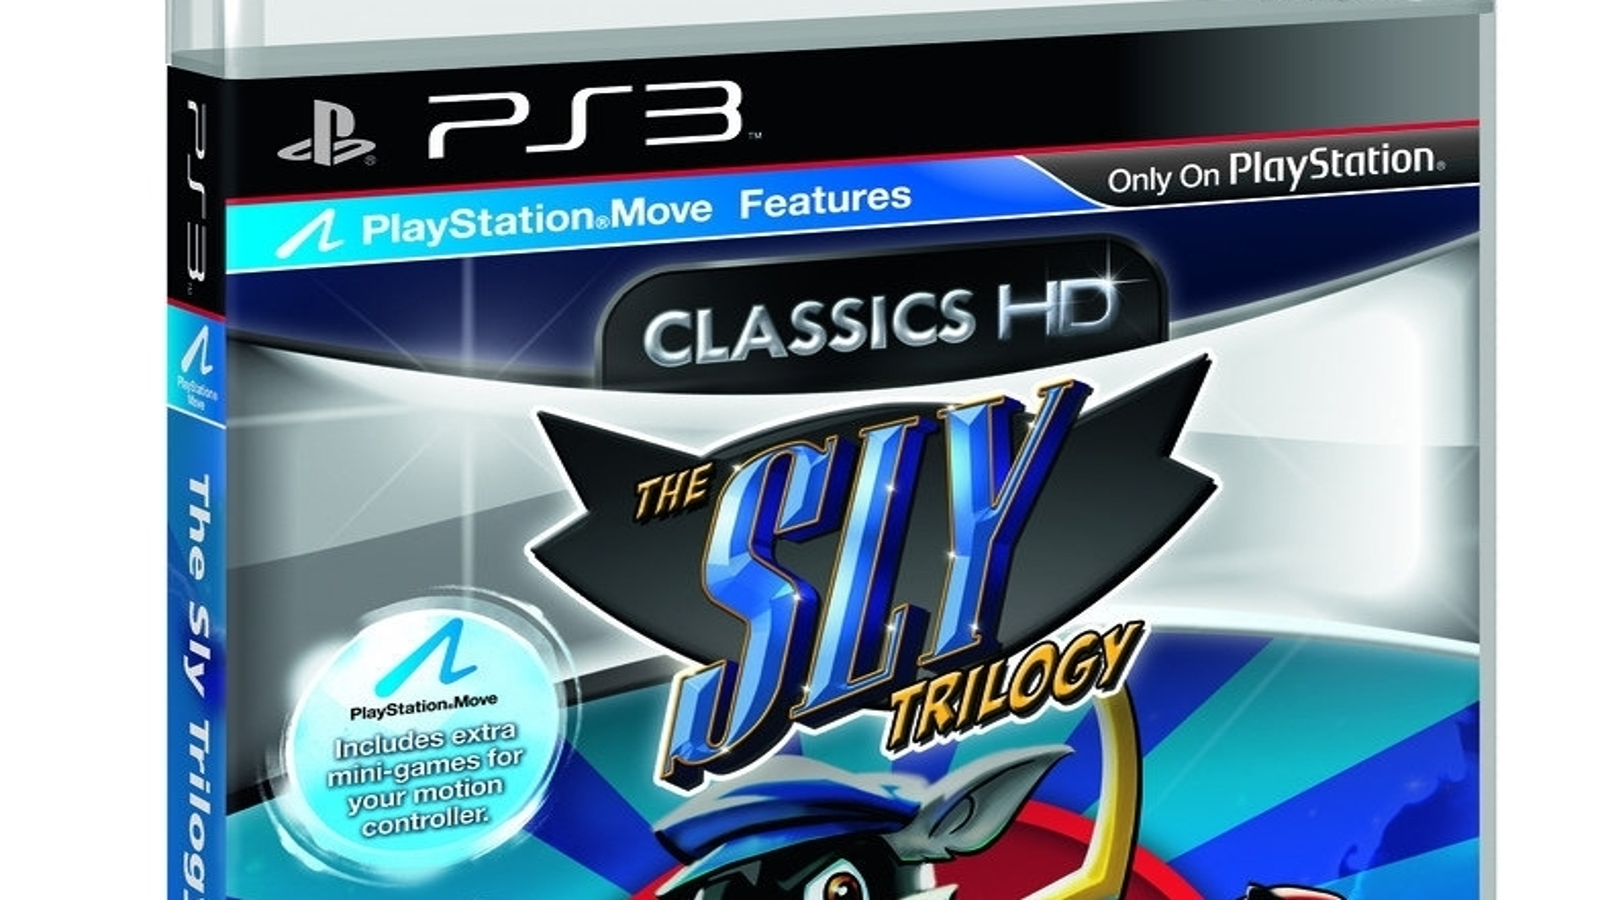 First Look: The Sly Collection in HD for PS3 – PlayStation.Blog